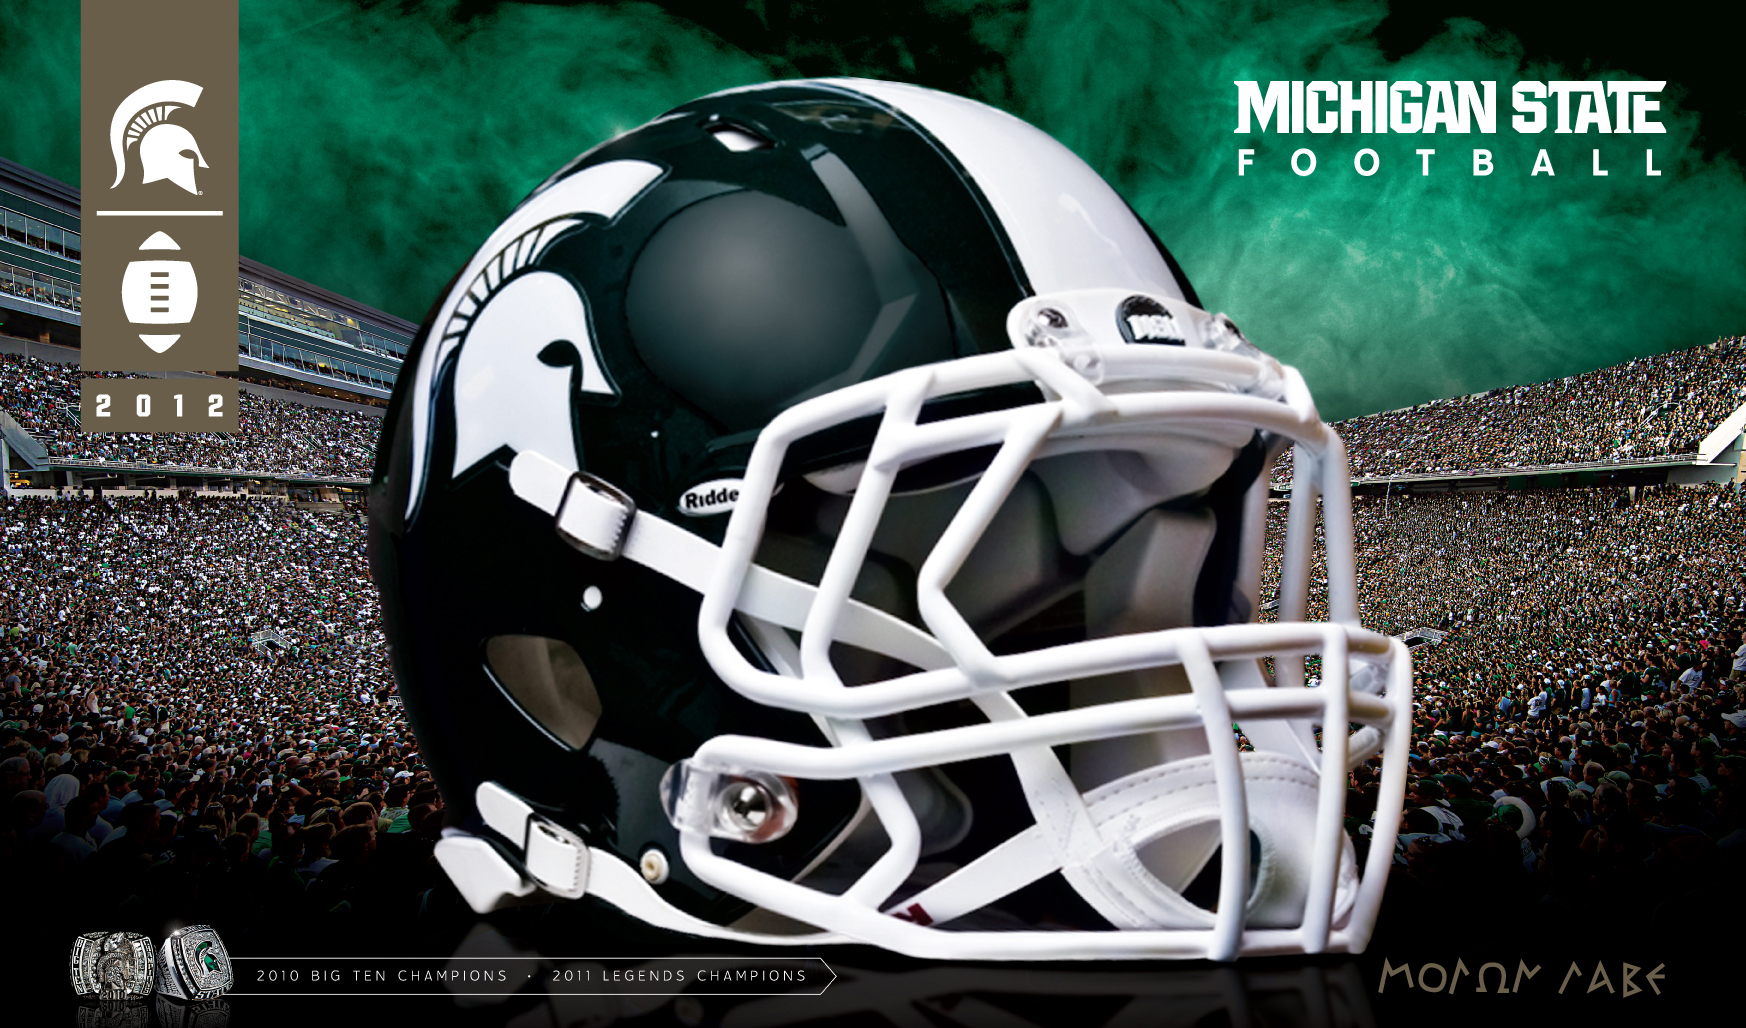 Michigan State Football videos images and buzz